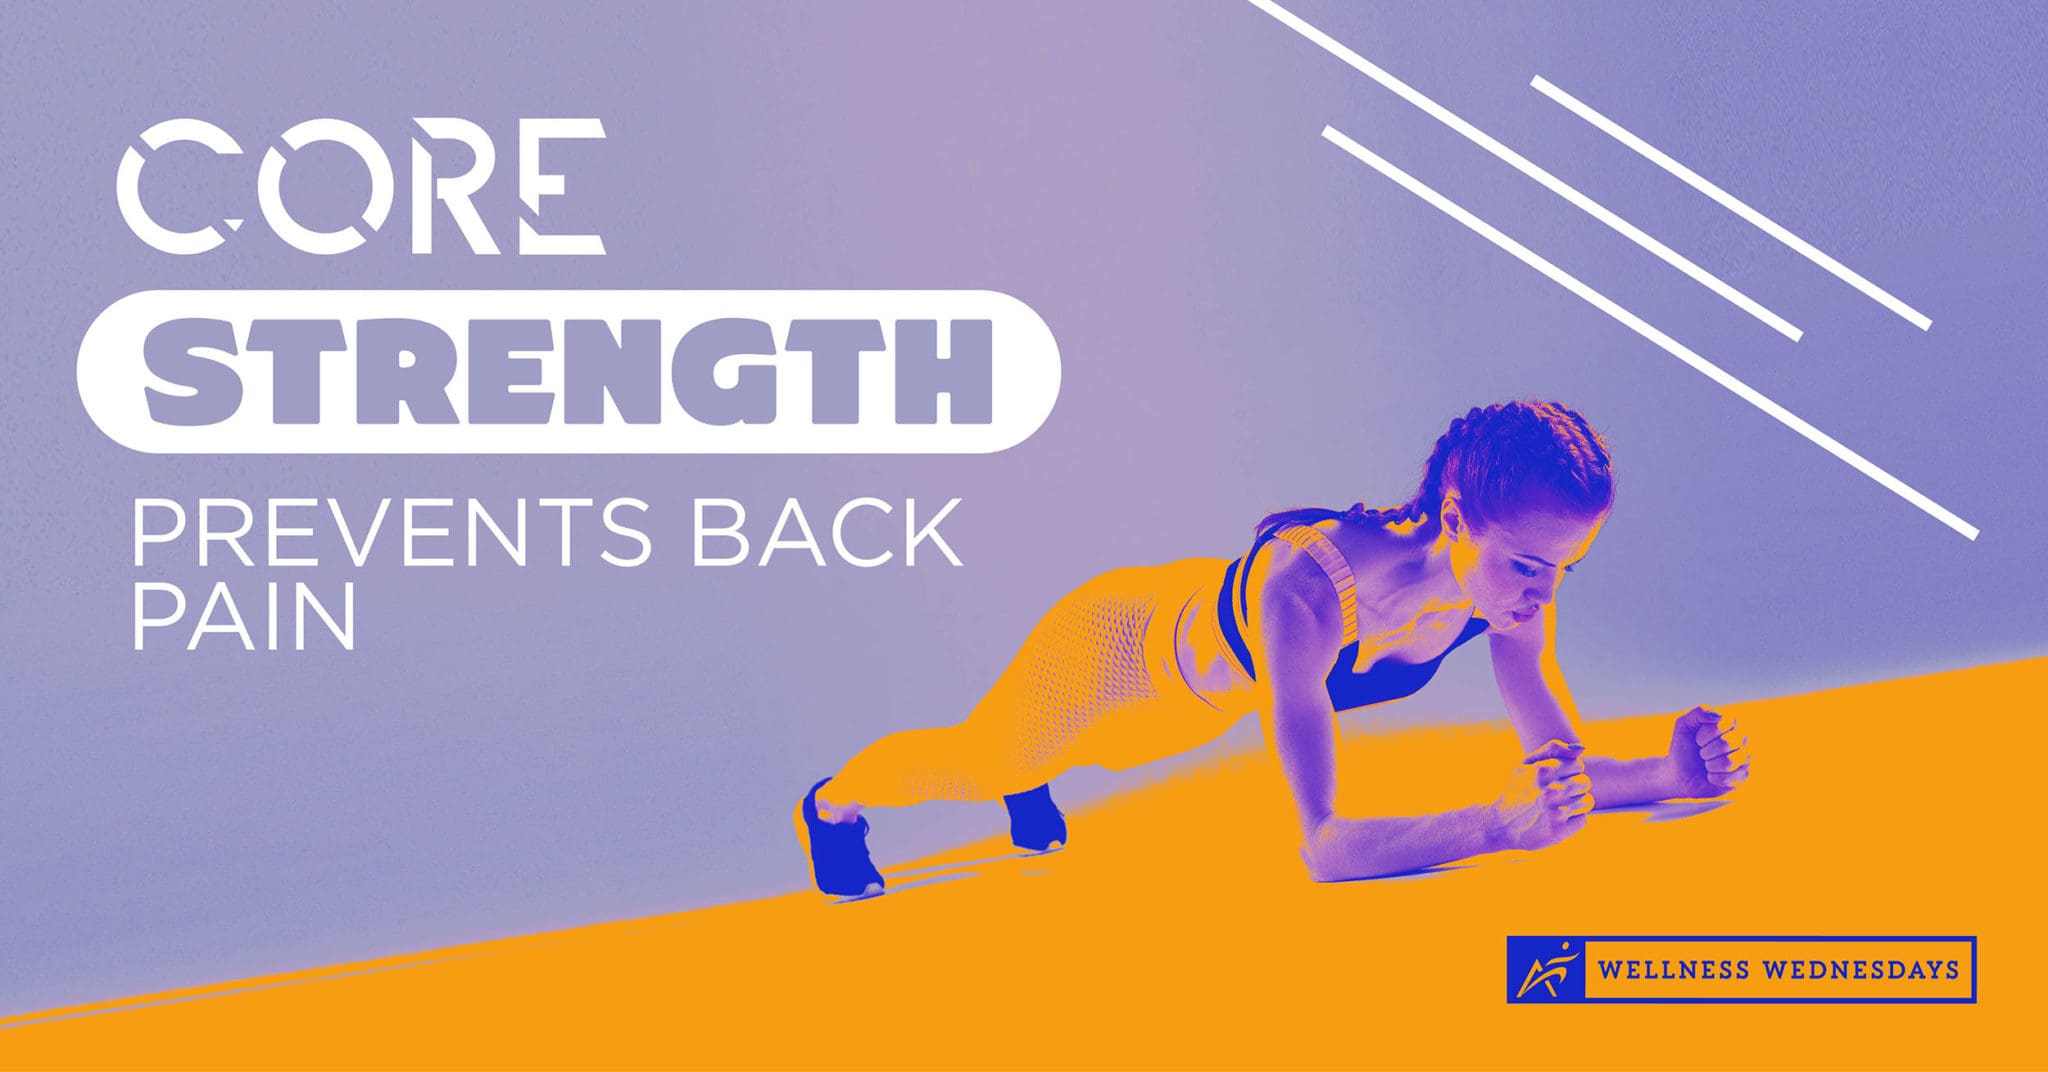 Core Strength Prevents Back Pain